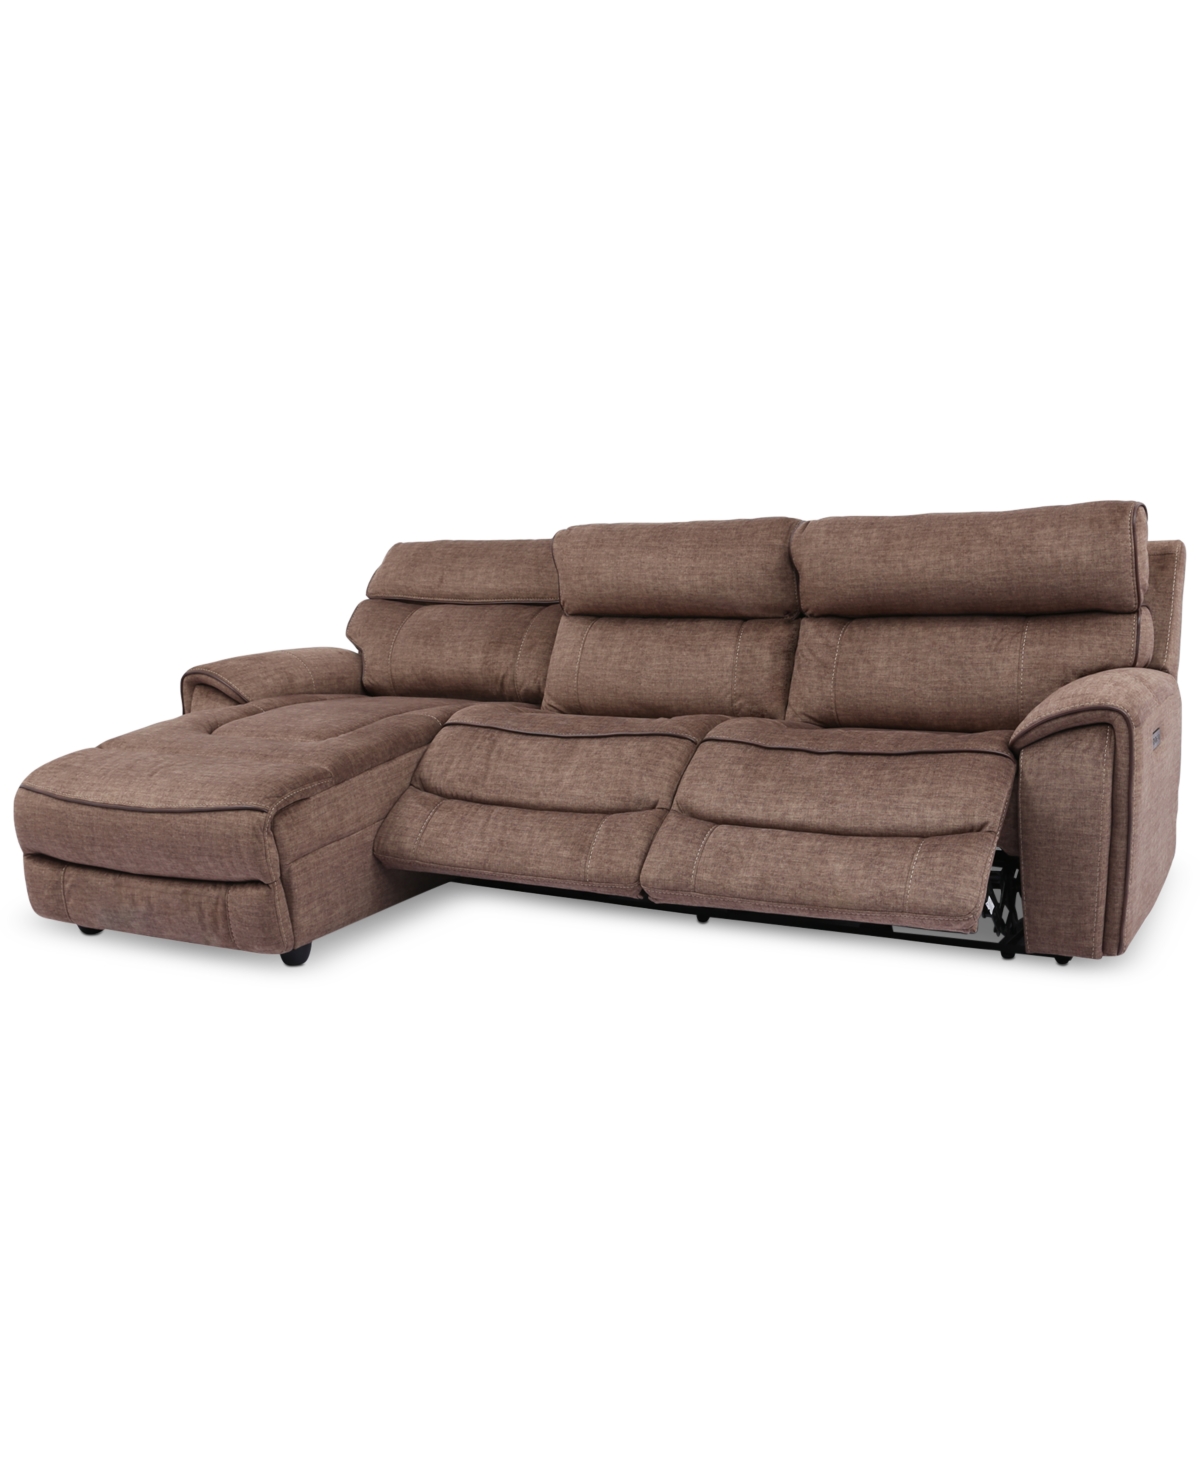 Furniture Hutchenson 3-pc. Fabric Chaise Sectional With 2 Power Recliners And Power Headrests In Chocolate Brown